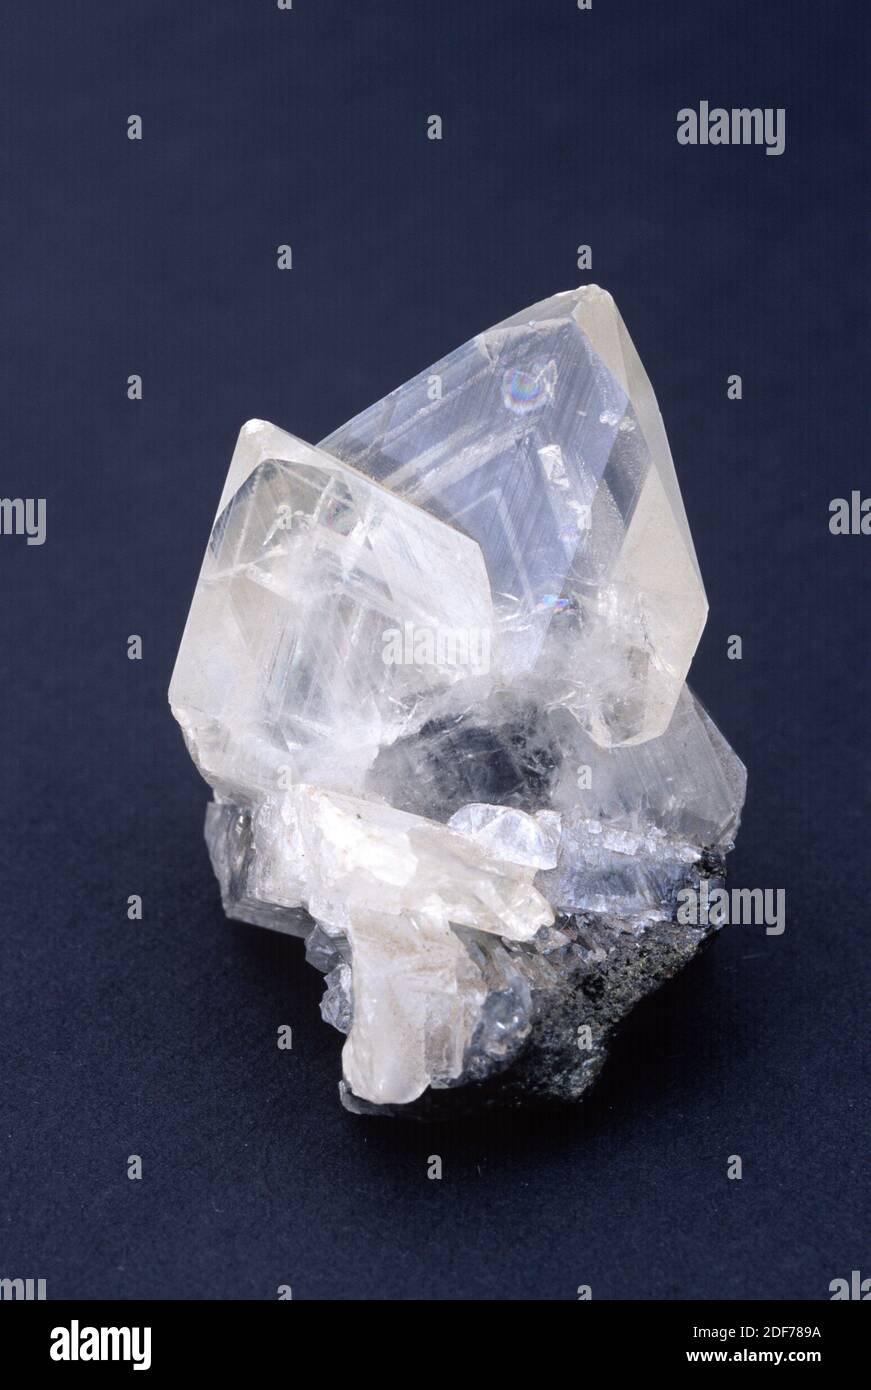 Anglesite is a lead sulfate mineral that crystallizes in the orthorhombic system. Sample. Stock Photo